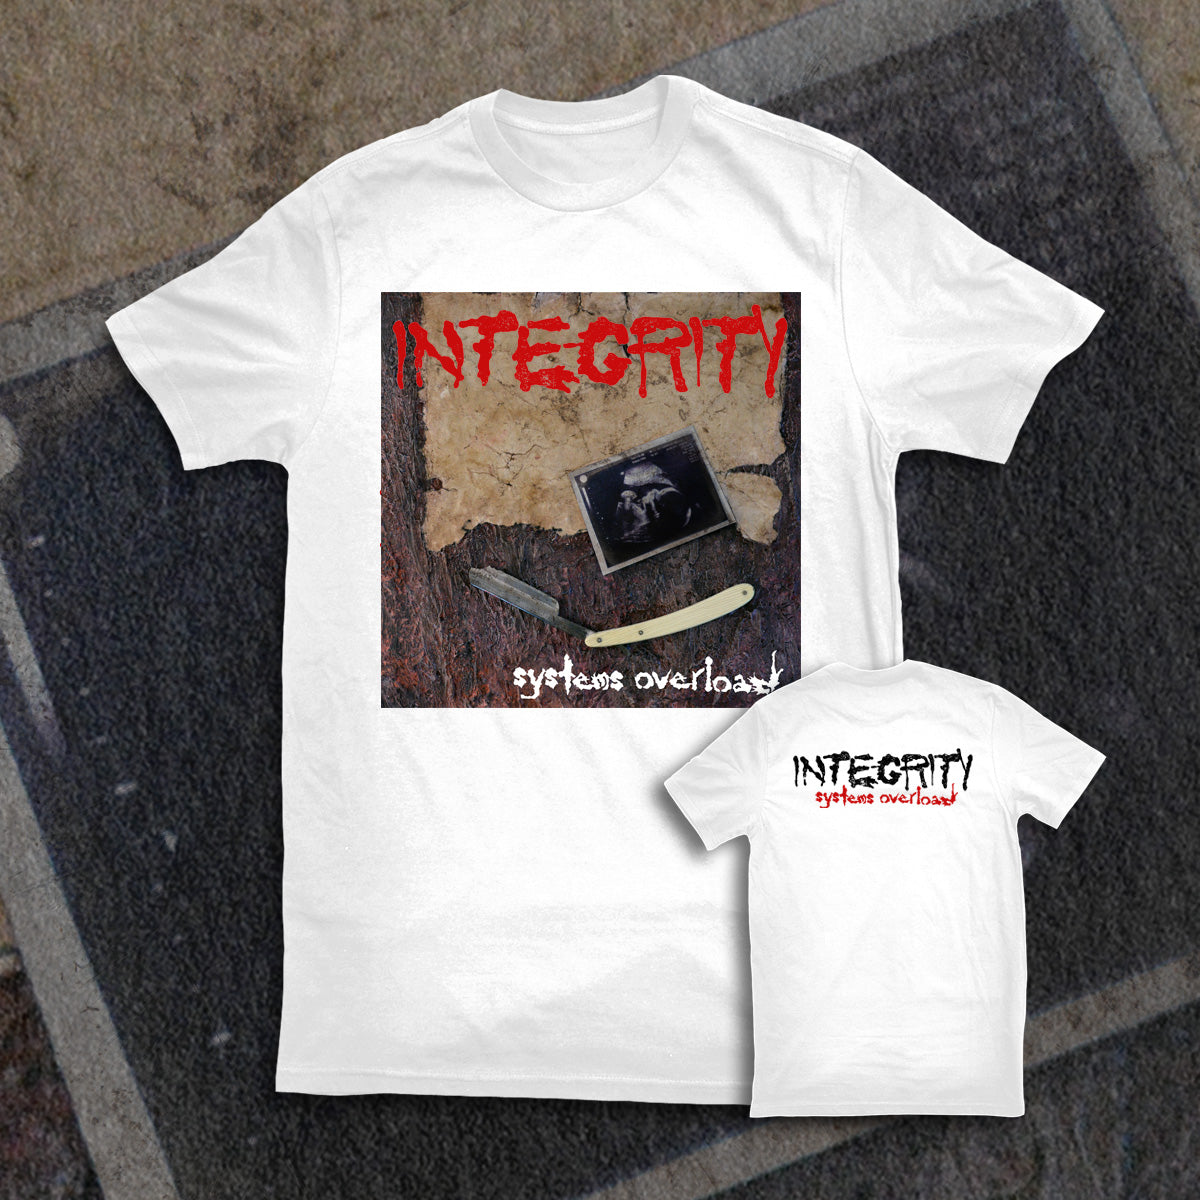 INTEGRITY "SYSTEMS OVERLOAD" CLASSIC SHIRT (PRE-ORDER)